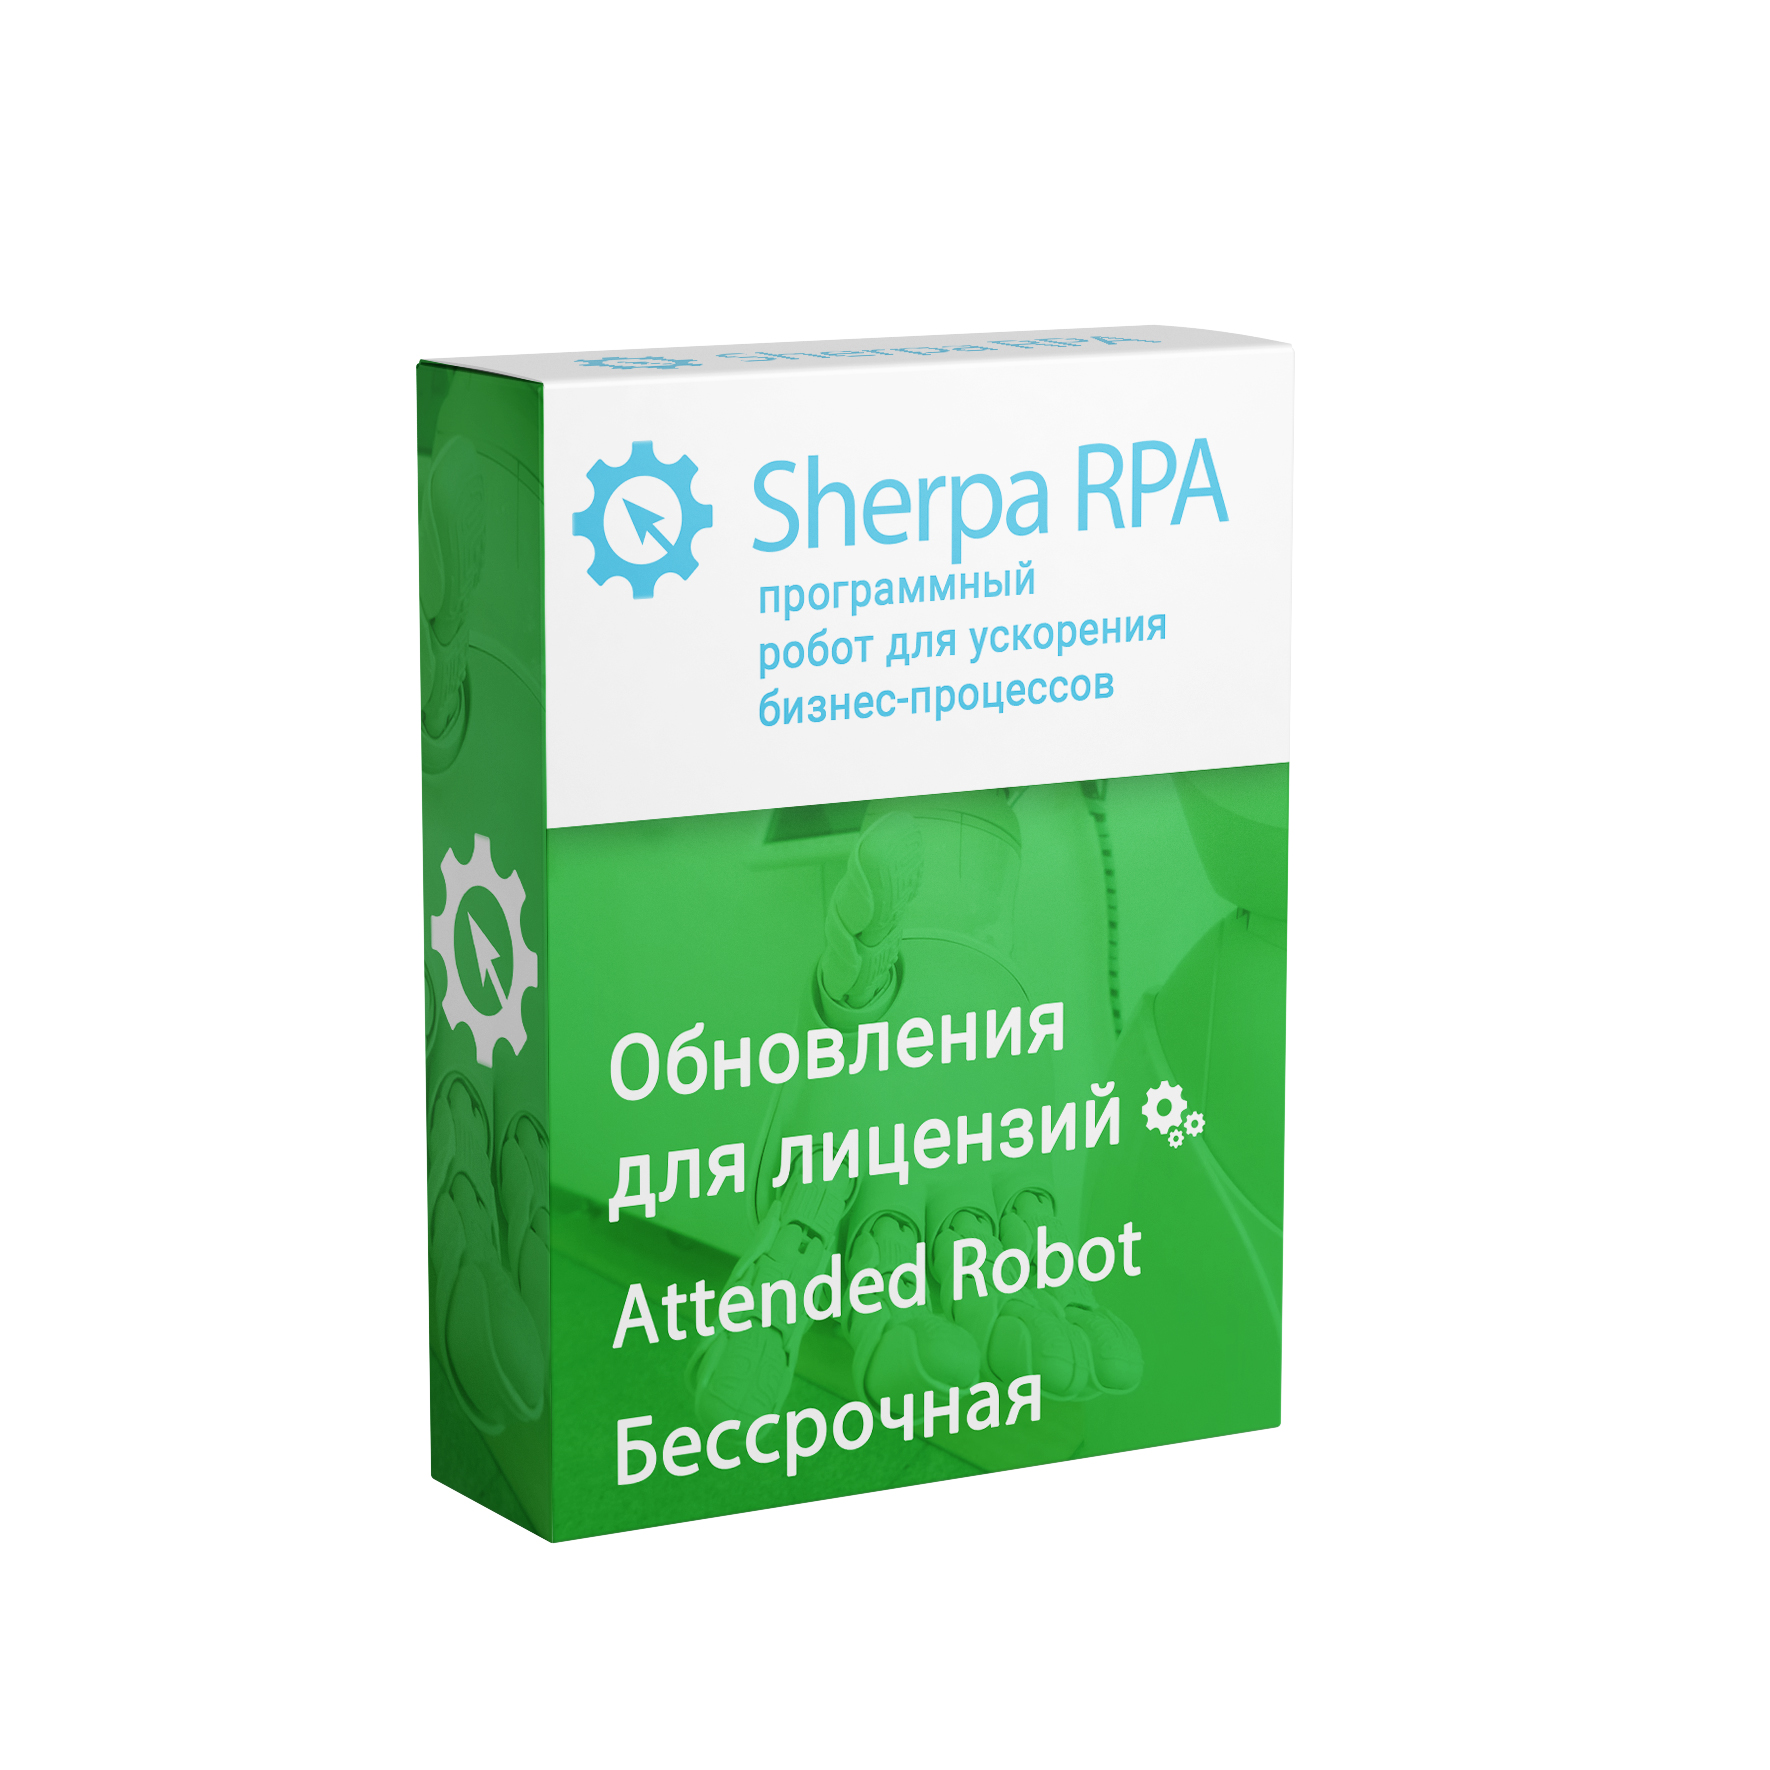 Sherpa RPA (Attended Robot, Бессрочная)